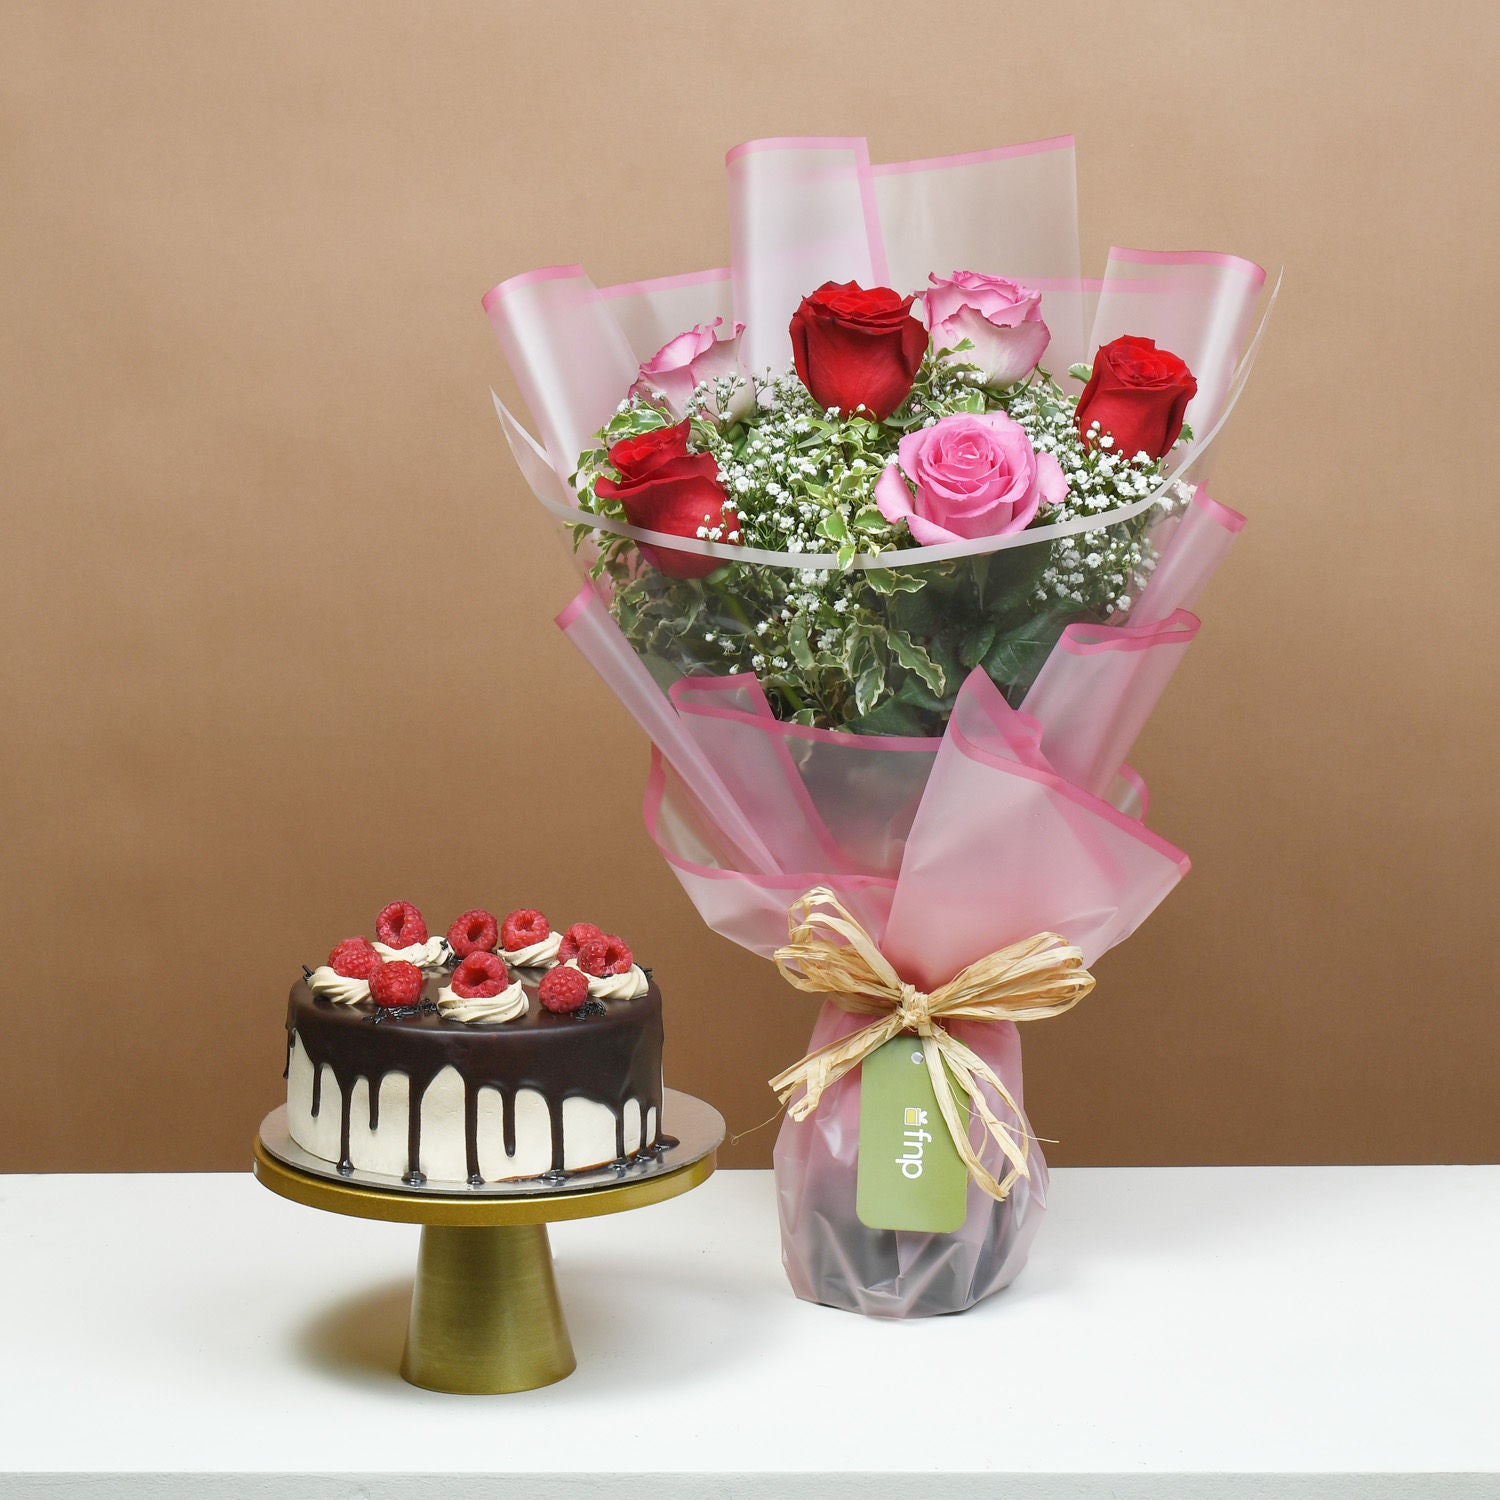 Loves Blushing Roses with Dripping Chocolate Cake